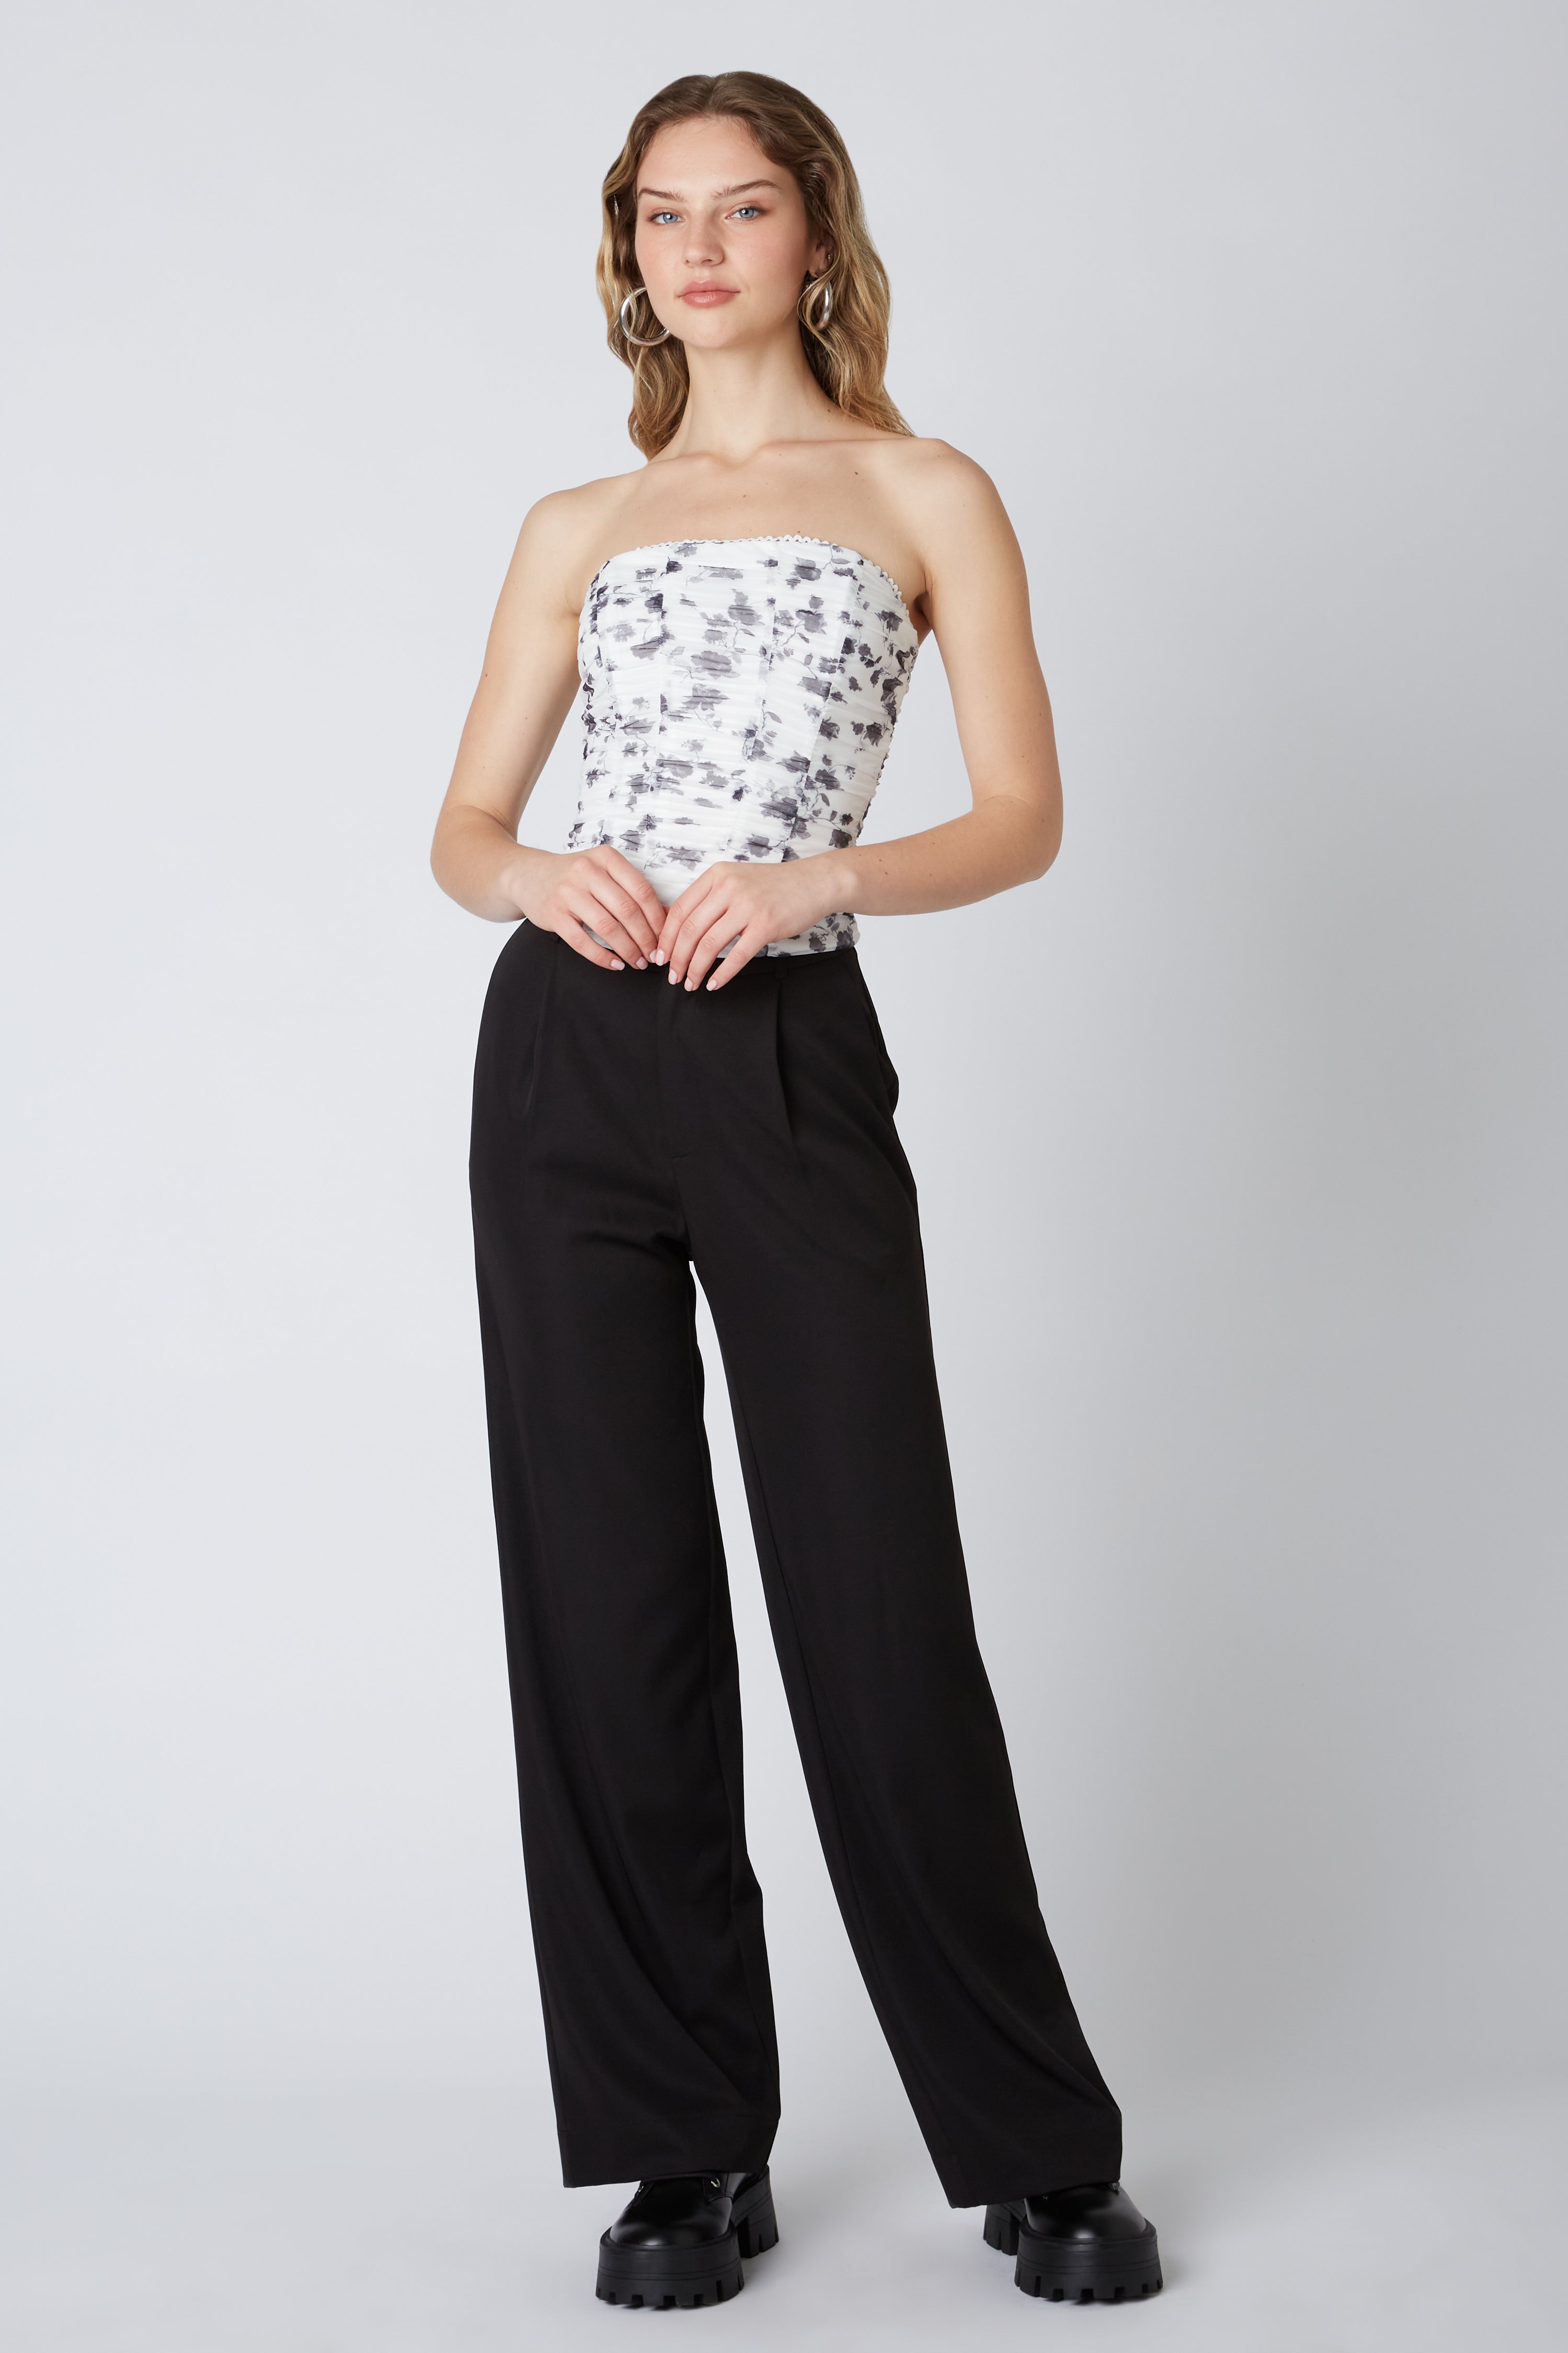 Ruched Floral Corset Top Black Front